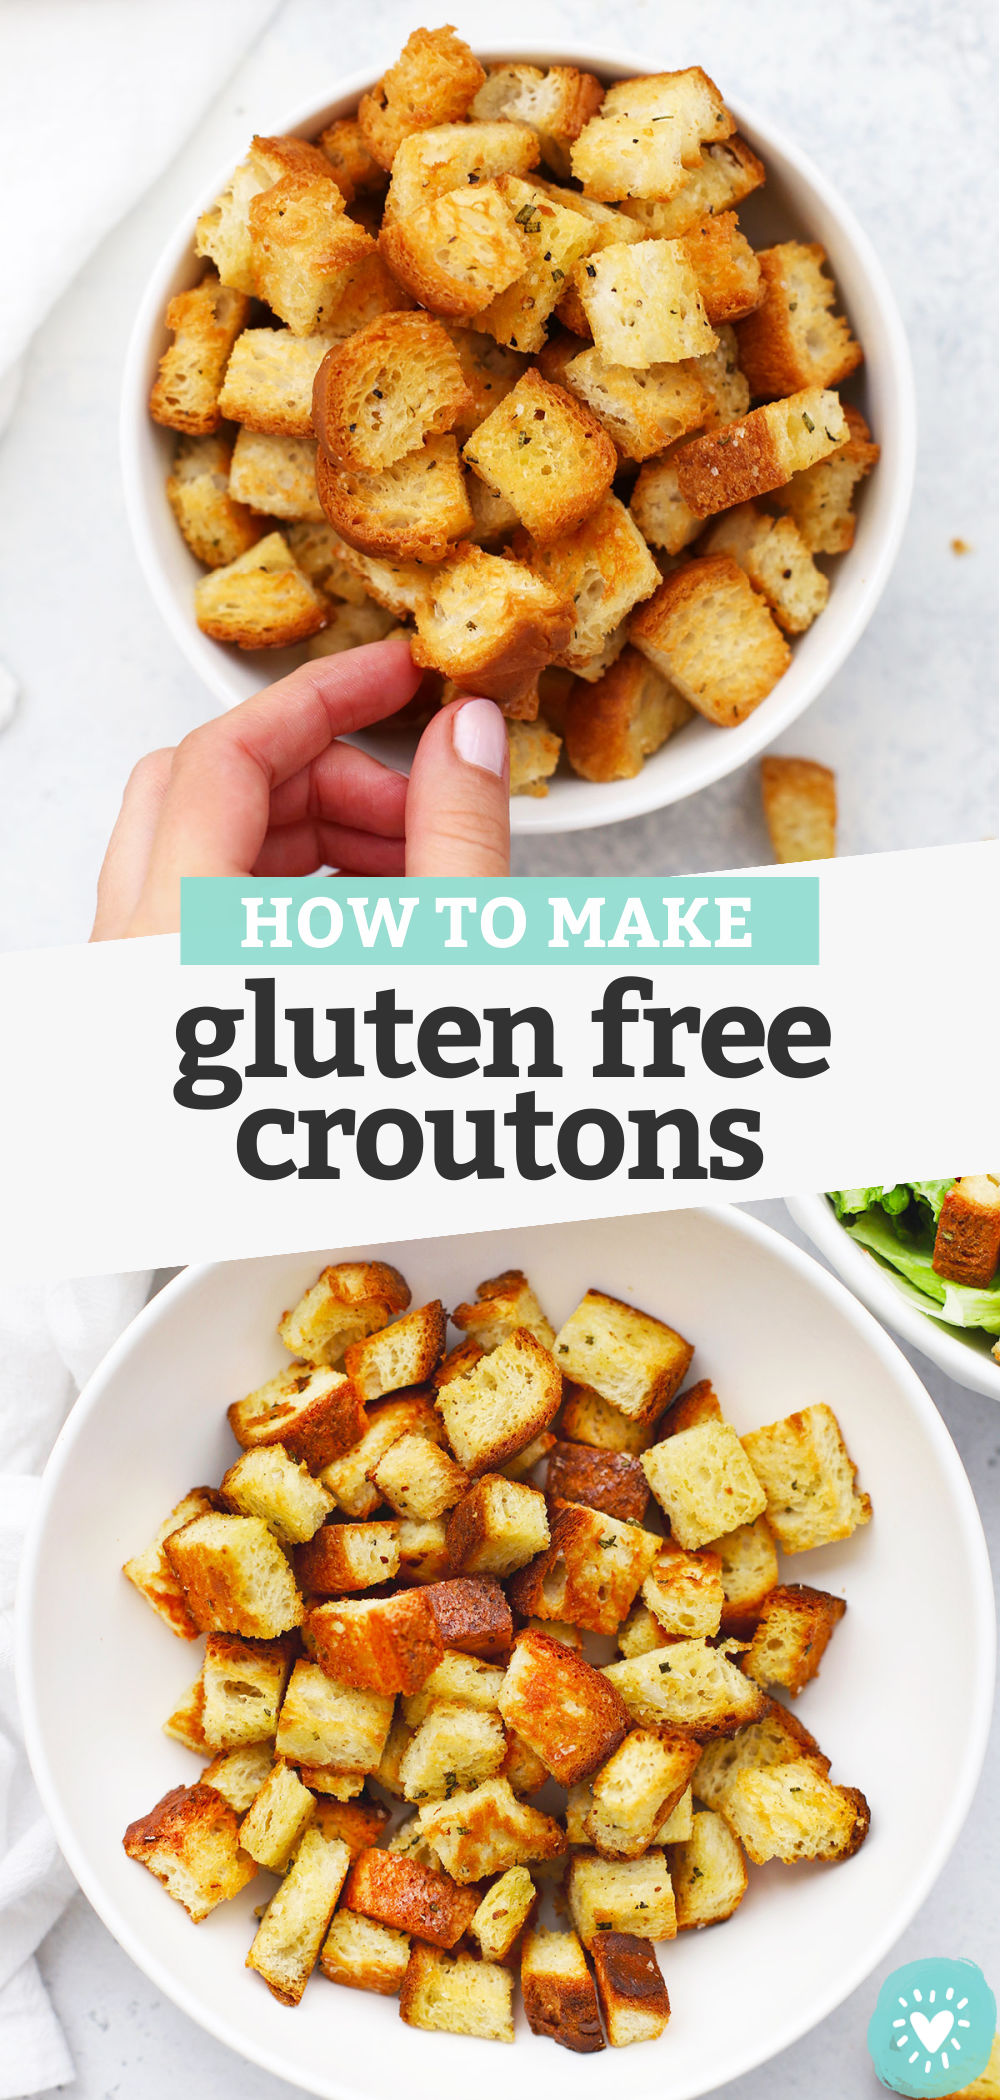 Collage of images of gluten-free croutons with text overlay that reads "How to Make Gluten-Free Croutons"